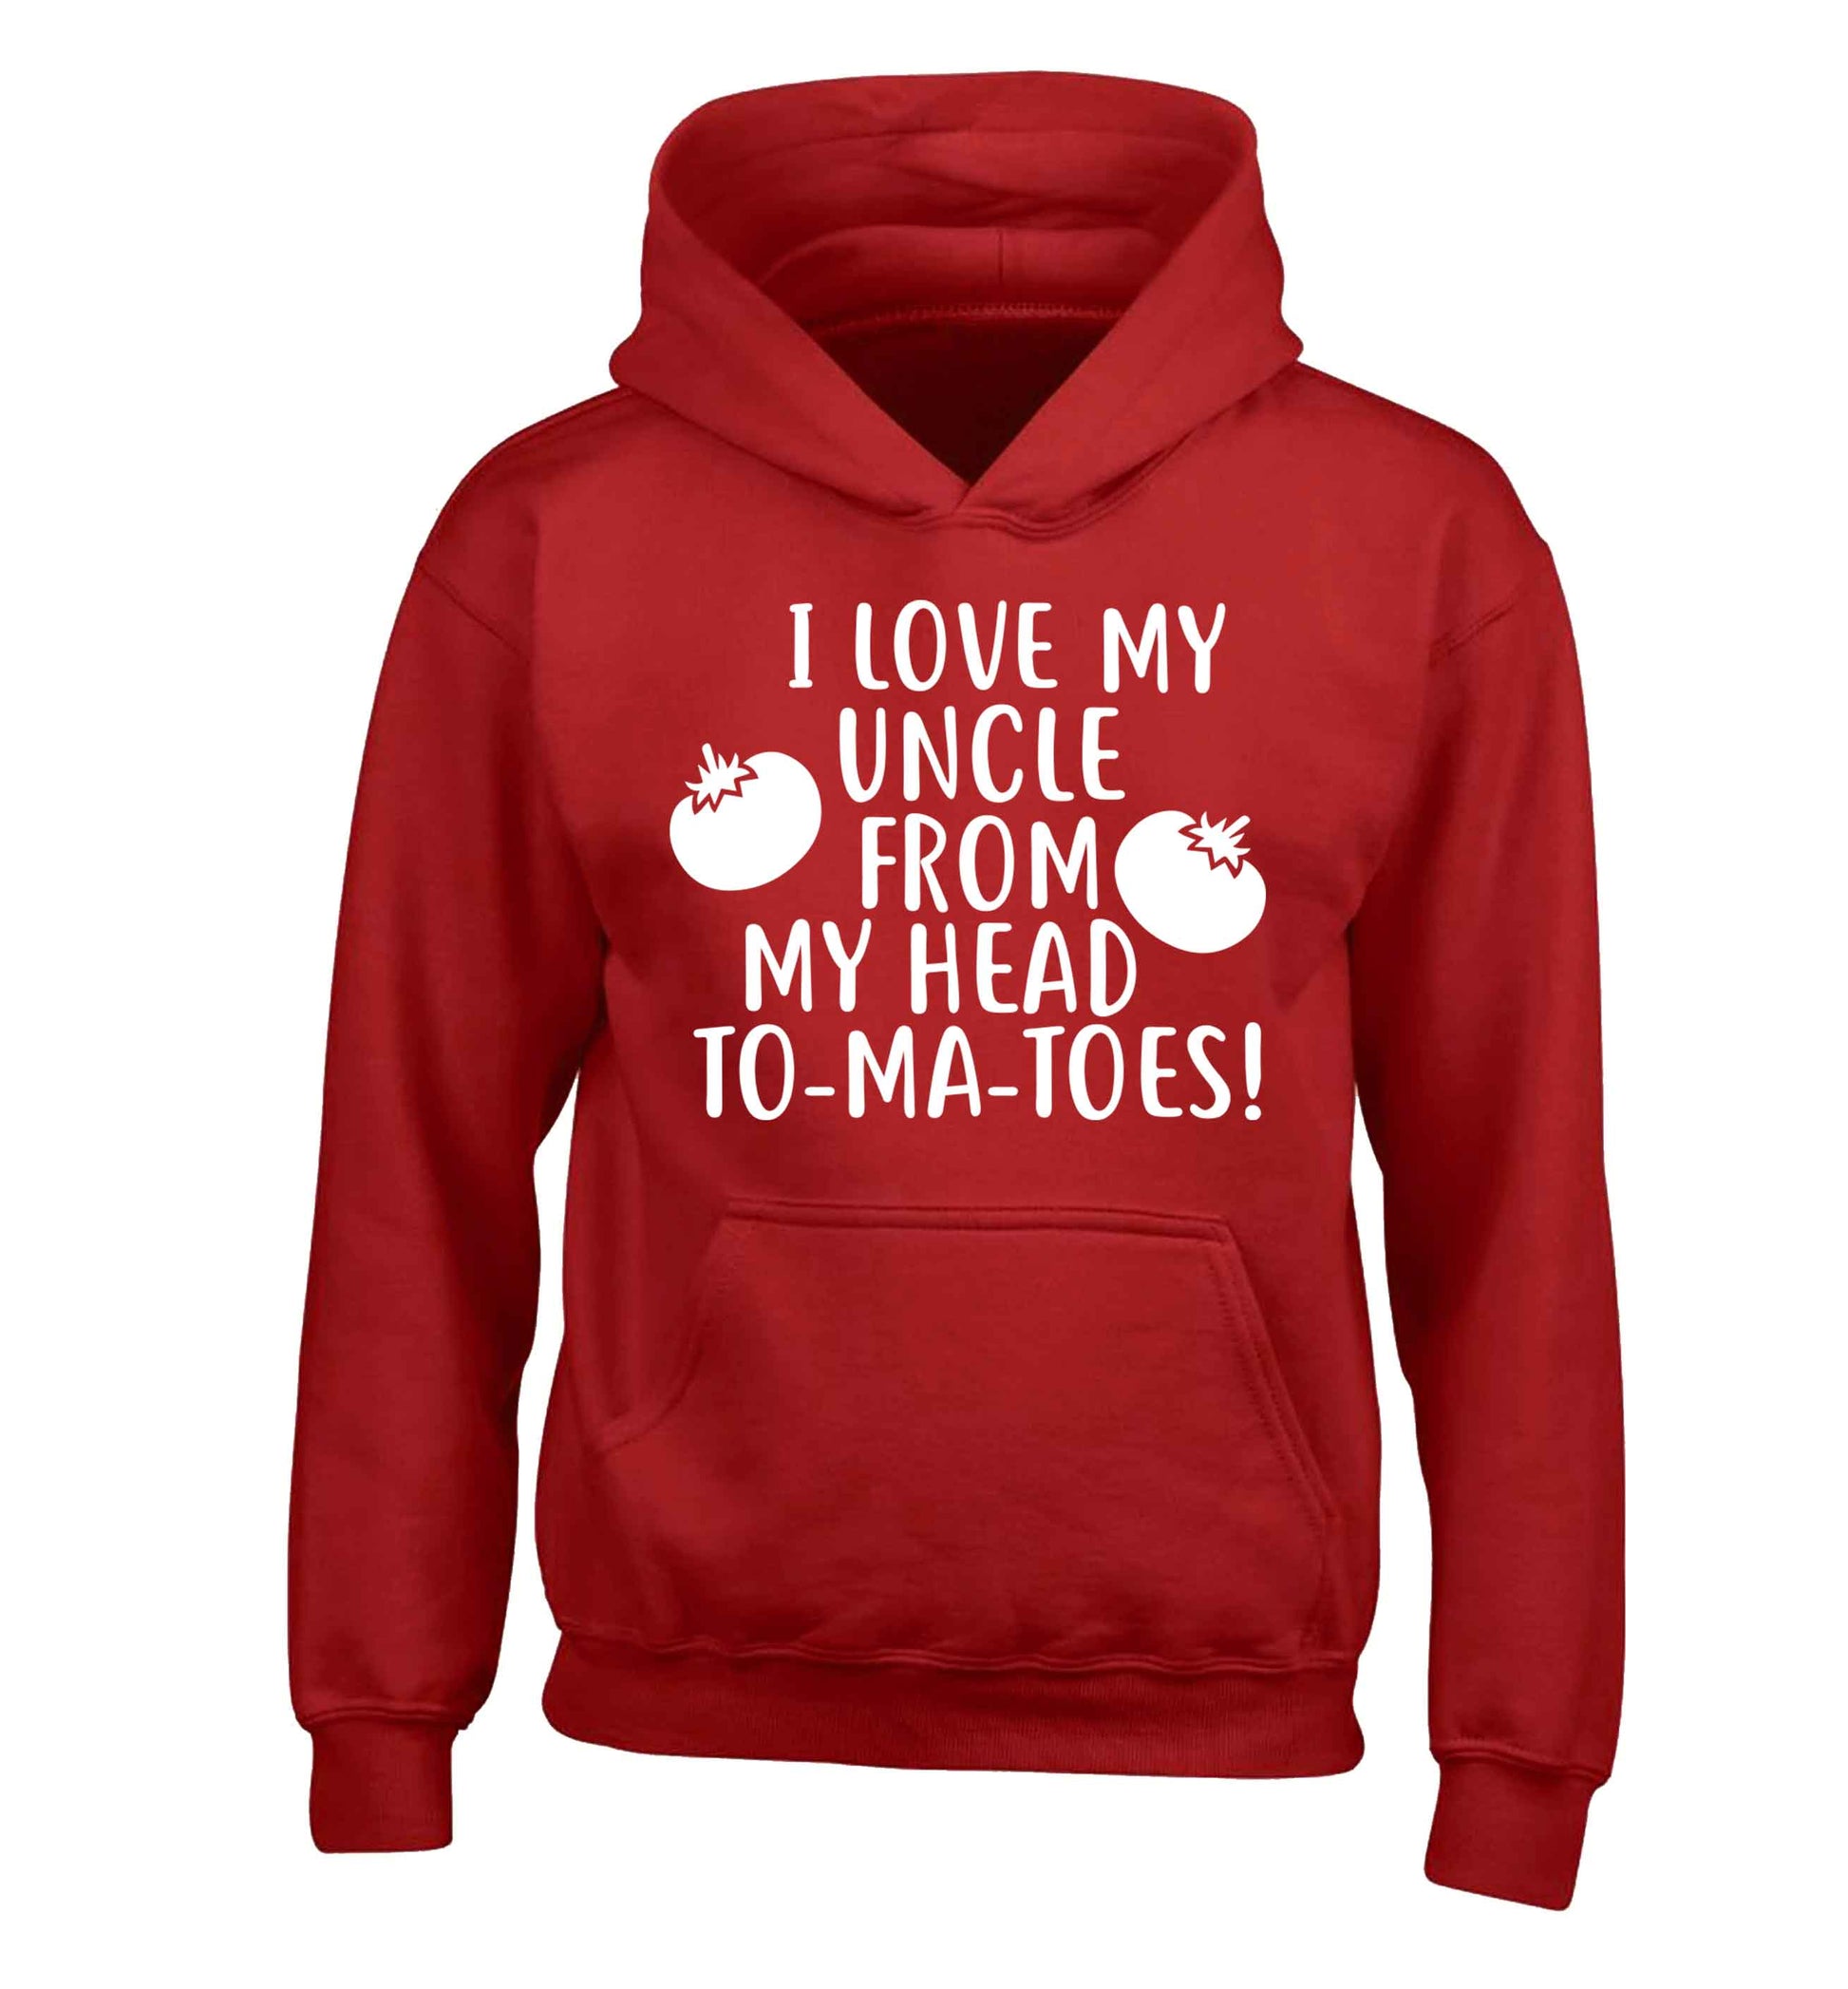 I love my uncle from my head To-Ma-Toes children's red hoodie 12-13 Years